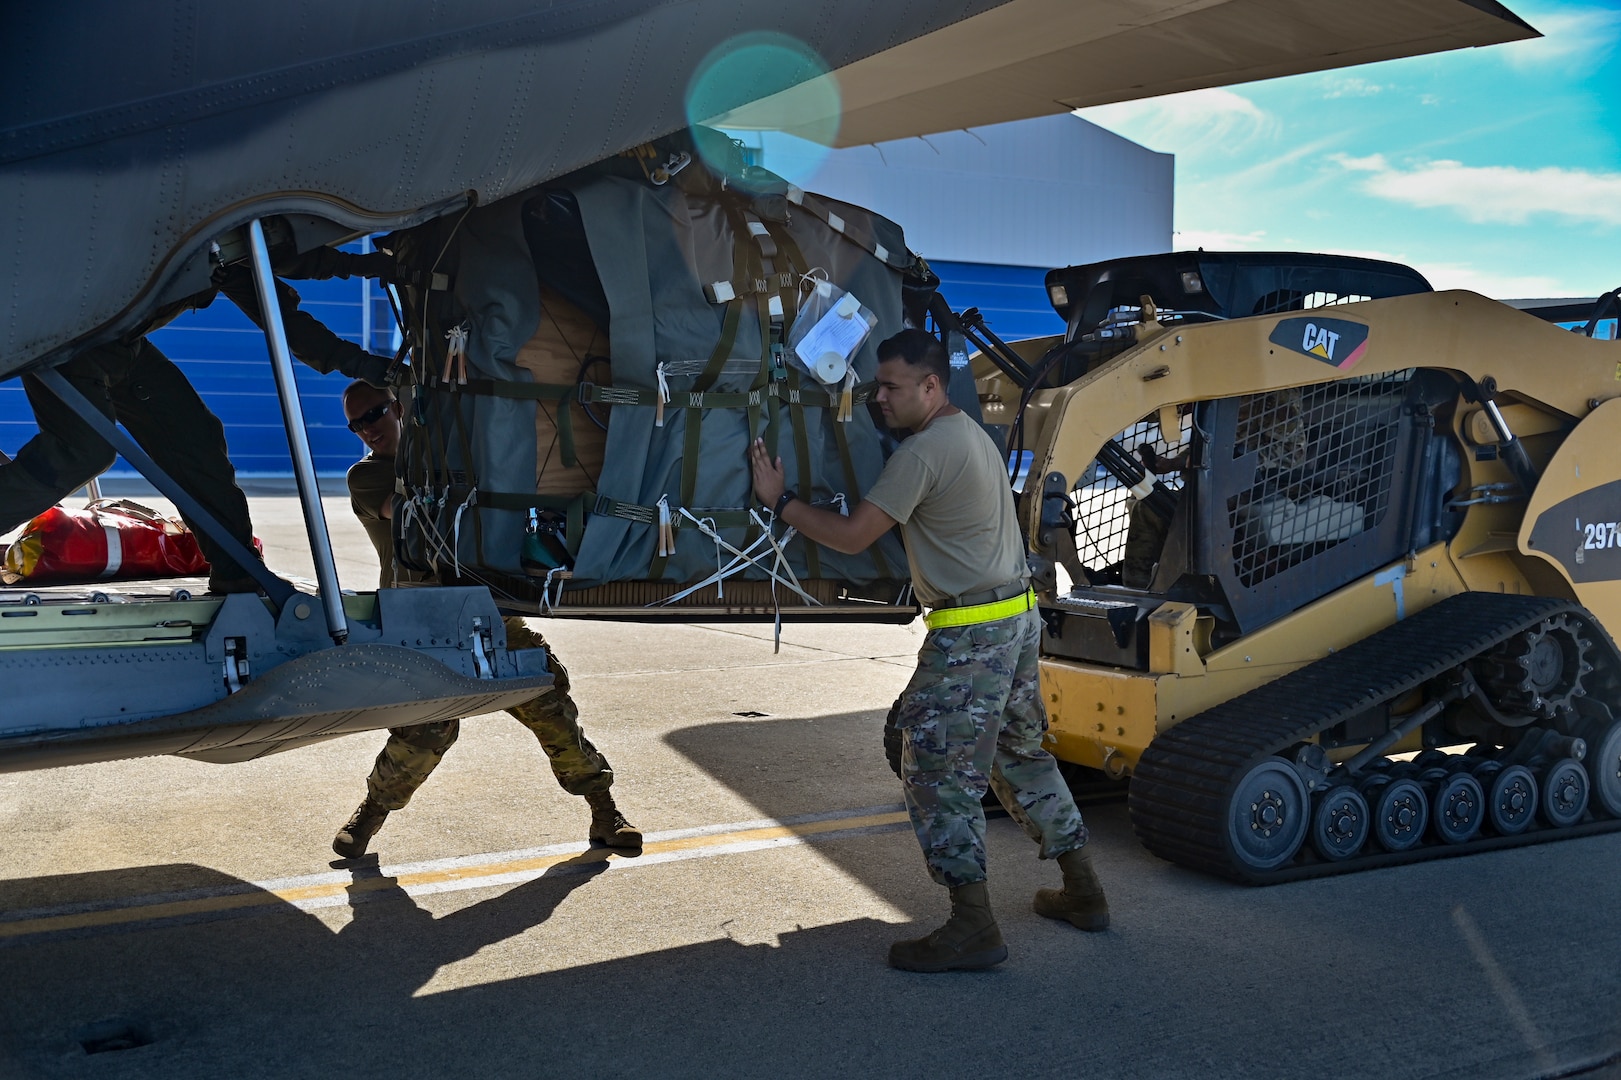 U.S. Air Force HC-130J Combat King II crew chiefs  assigned with the 129th Aircraft Maintenance Squadron, 129th Rescue Wing, California Air National Guard, loads rescue equipment onto the aircraft, August 5, 2022 at Moffett Air National Guard Base, Calif.